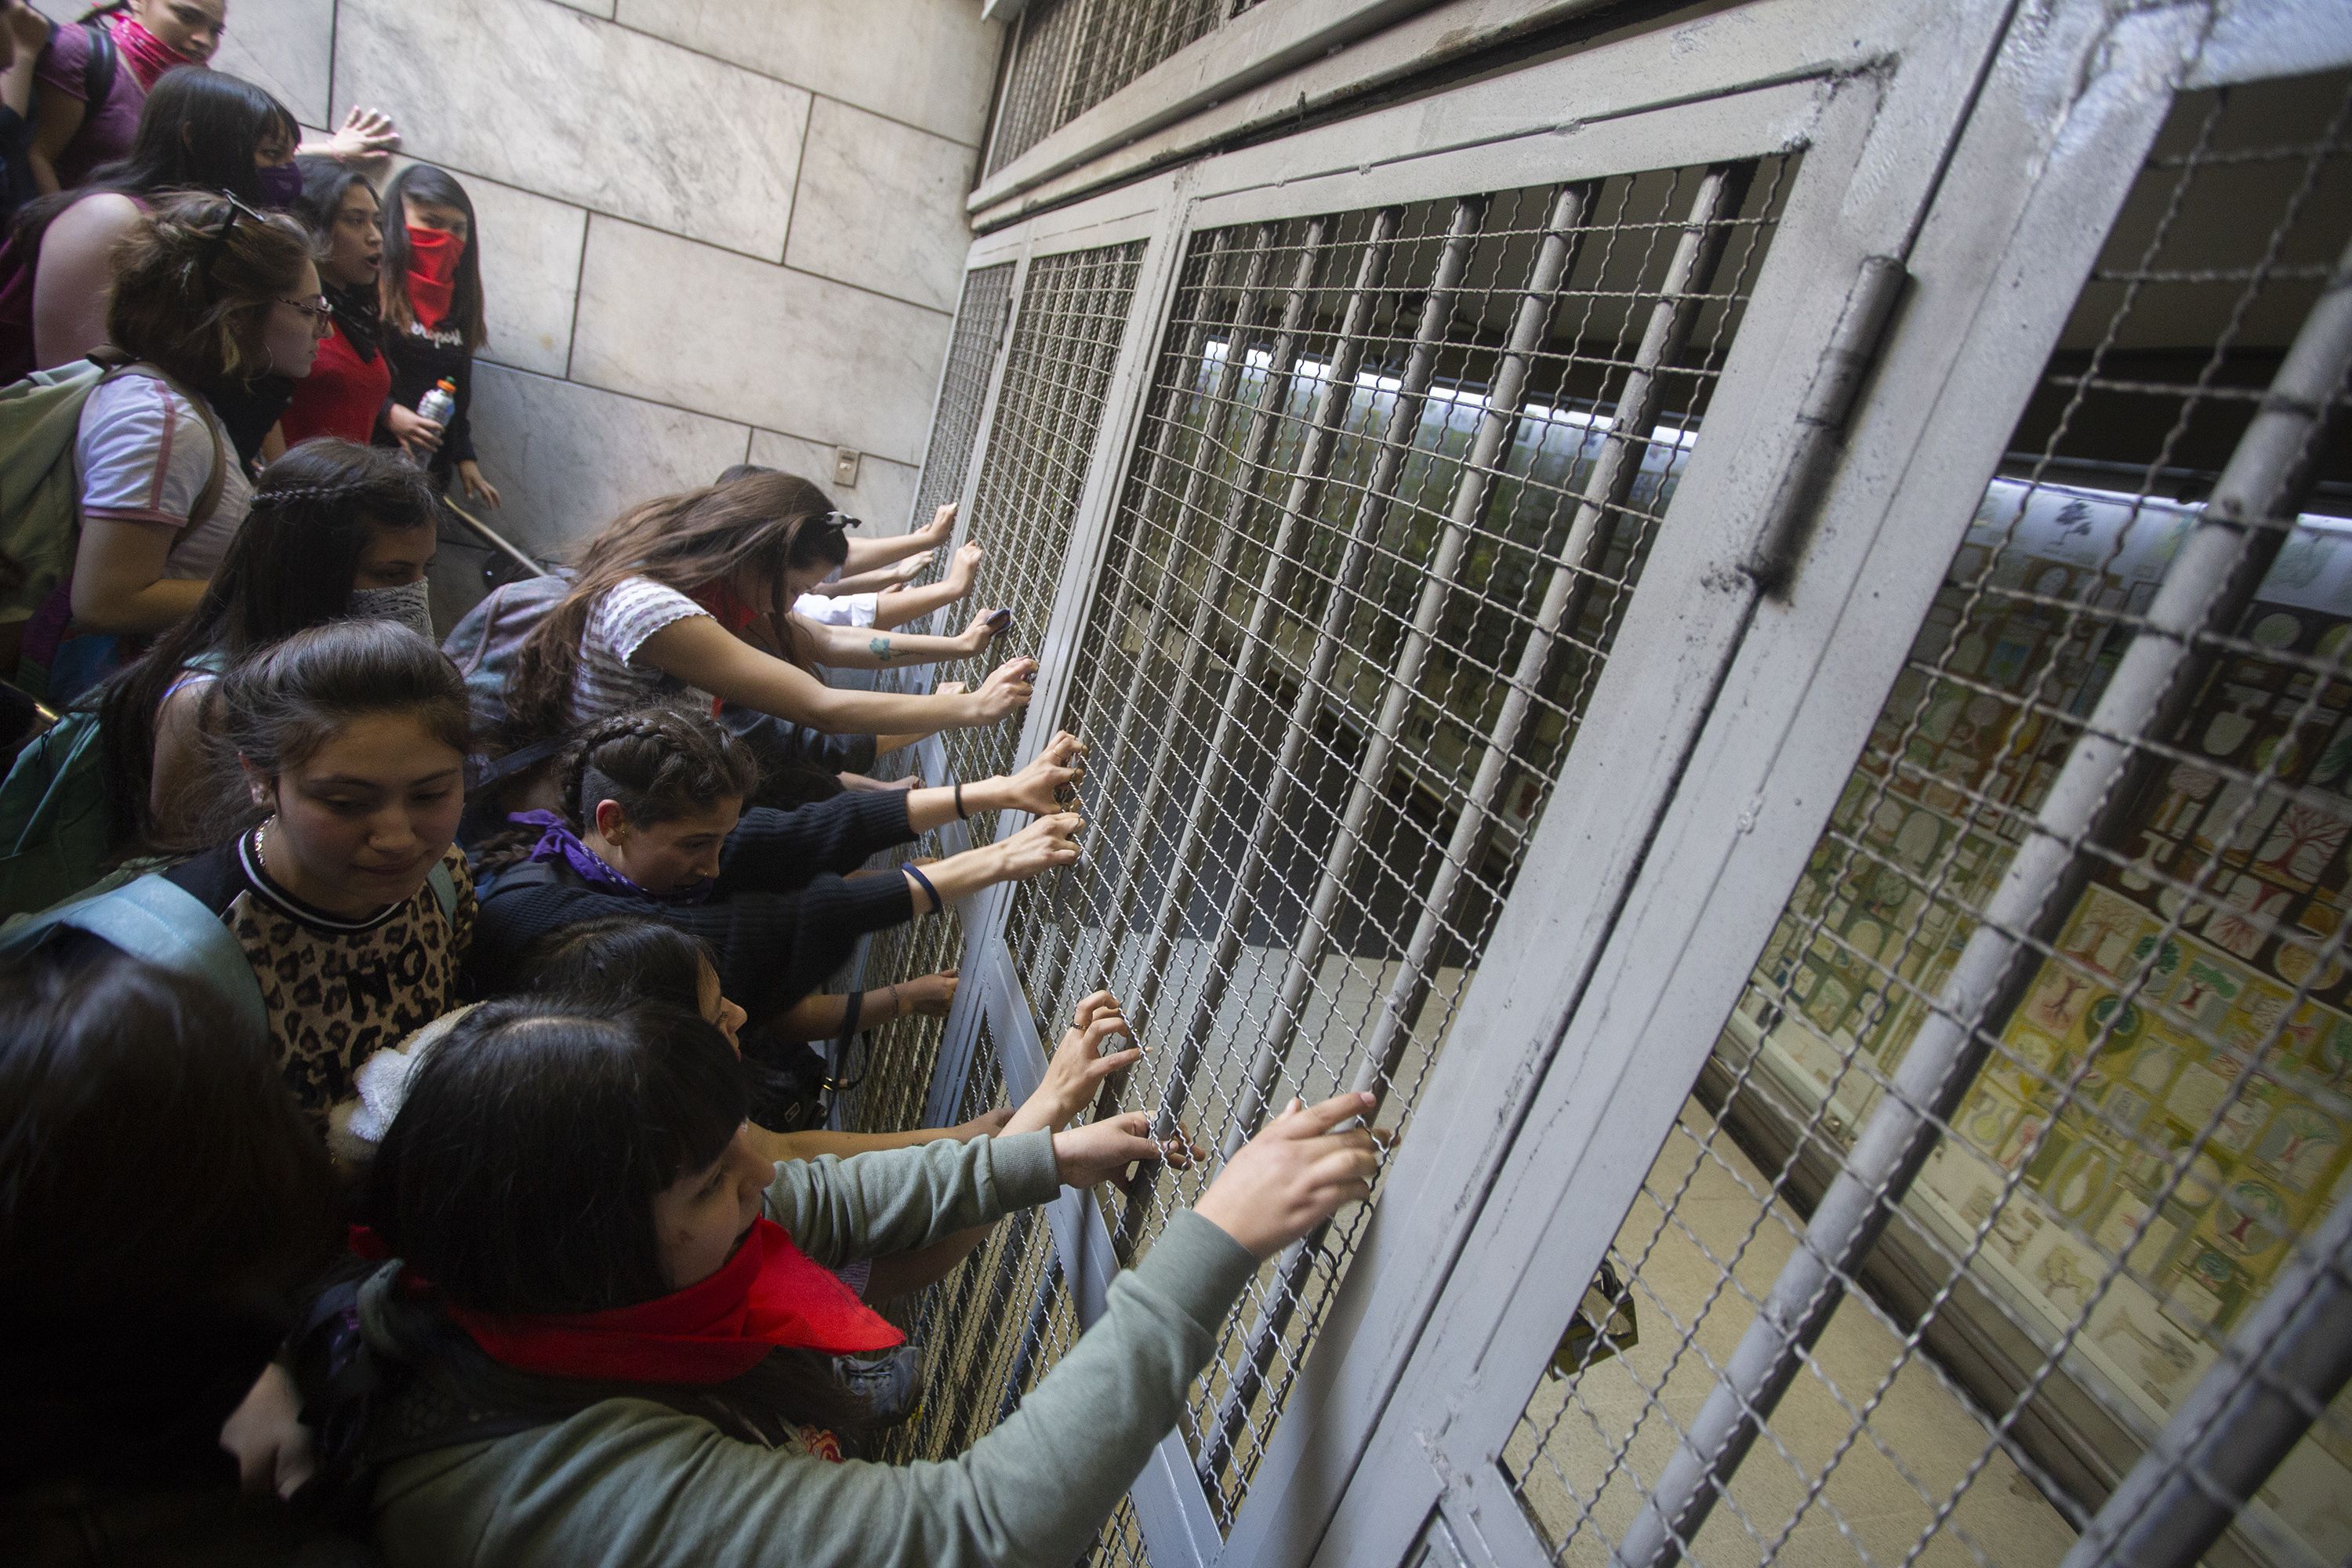 In this image, a line of protestors grab onto a metro grate 